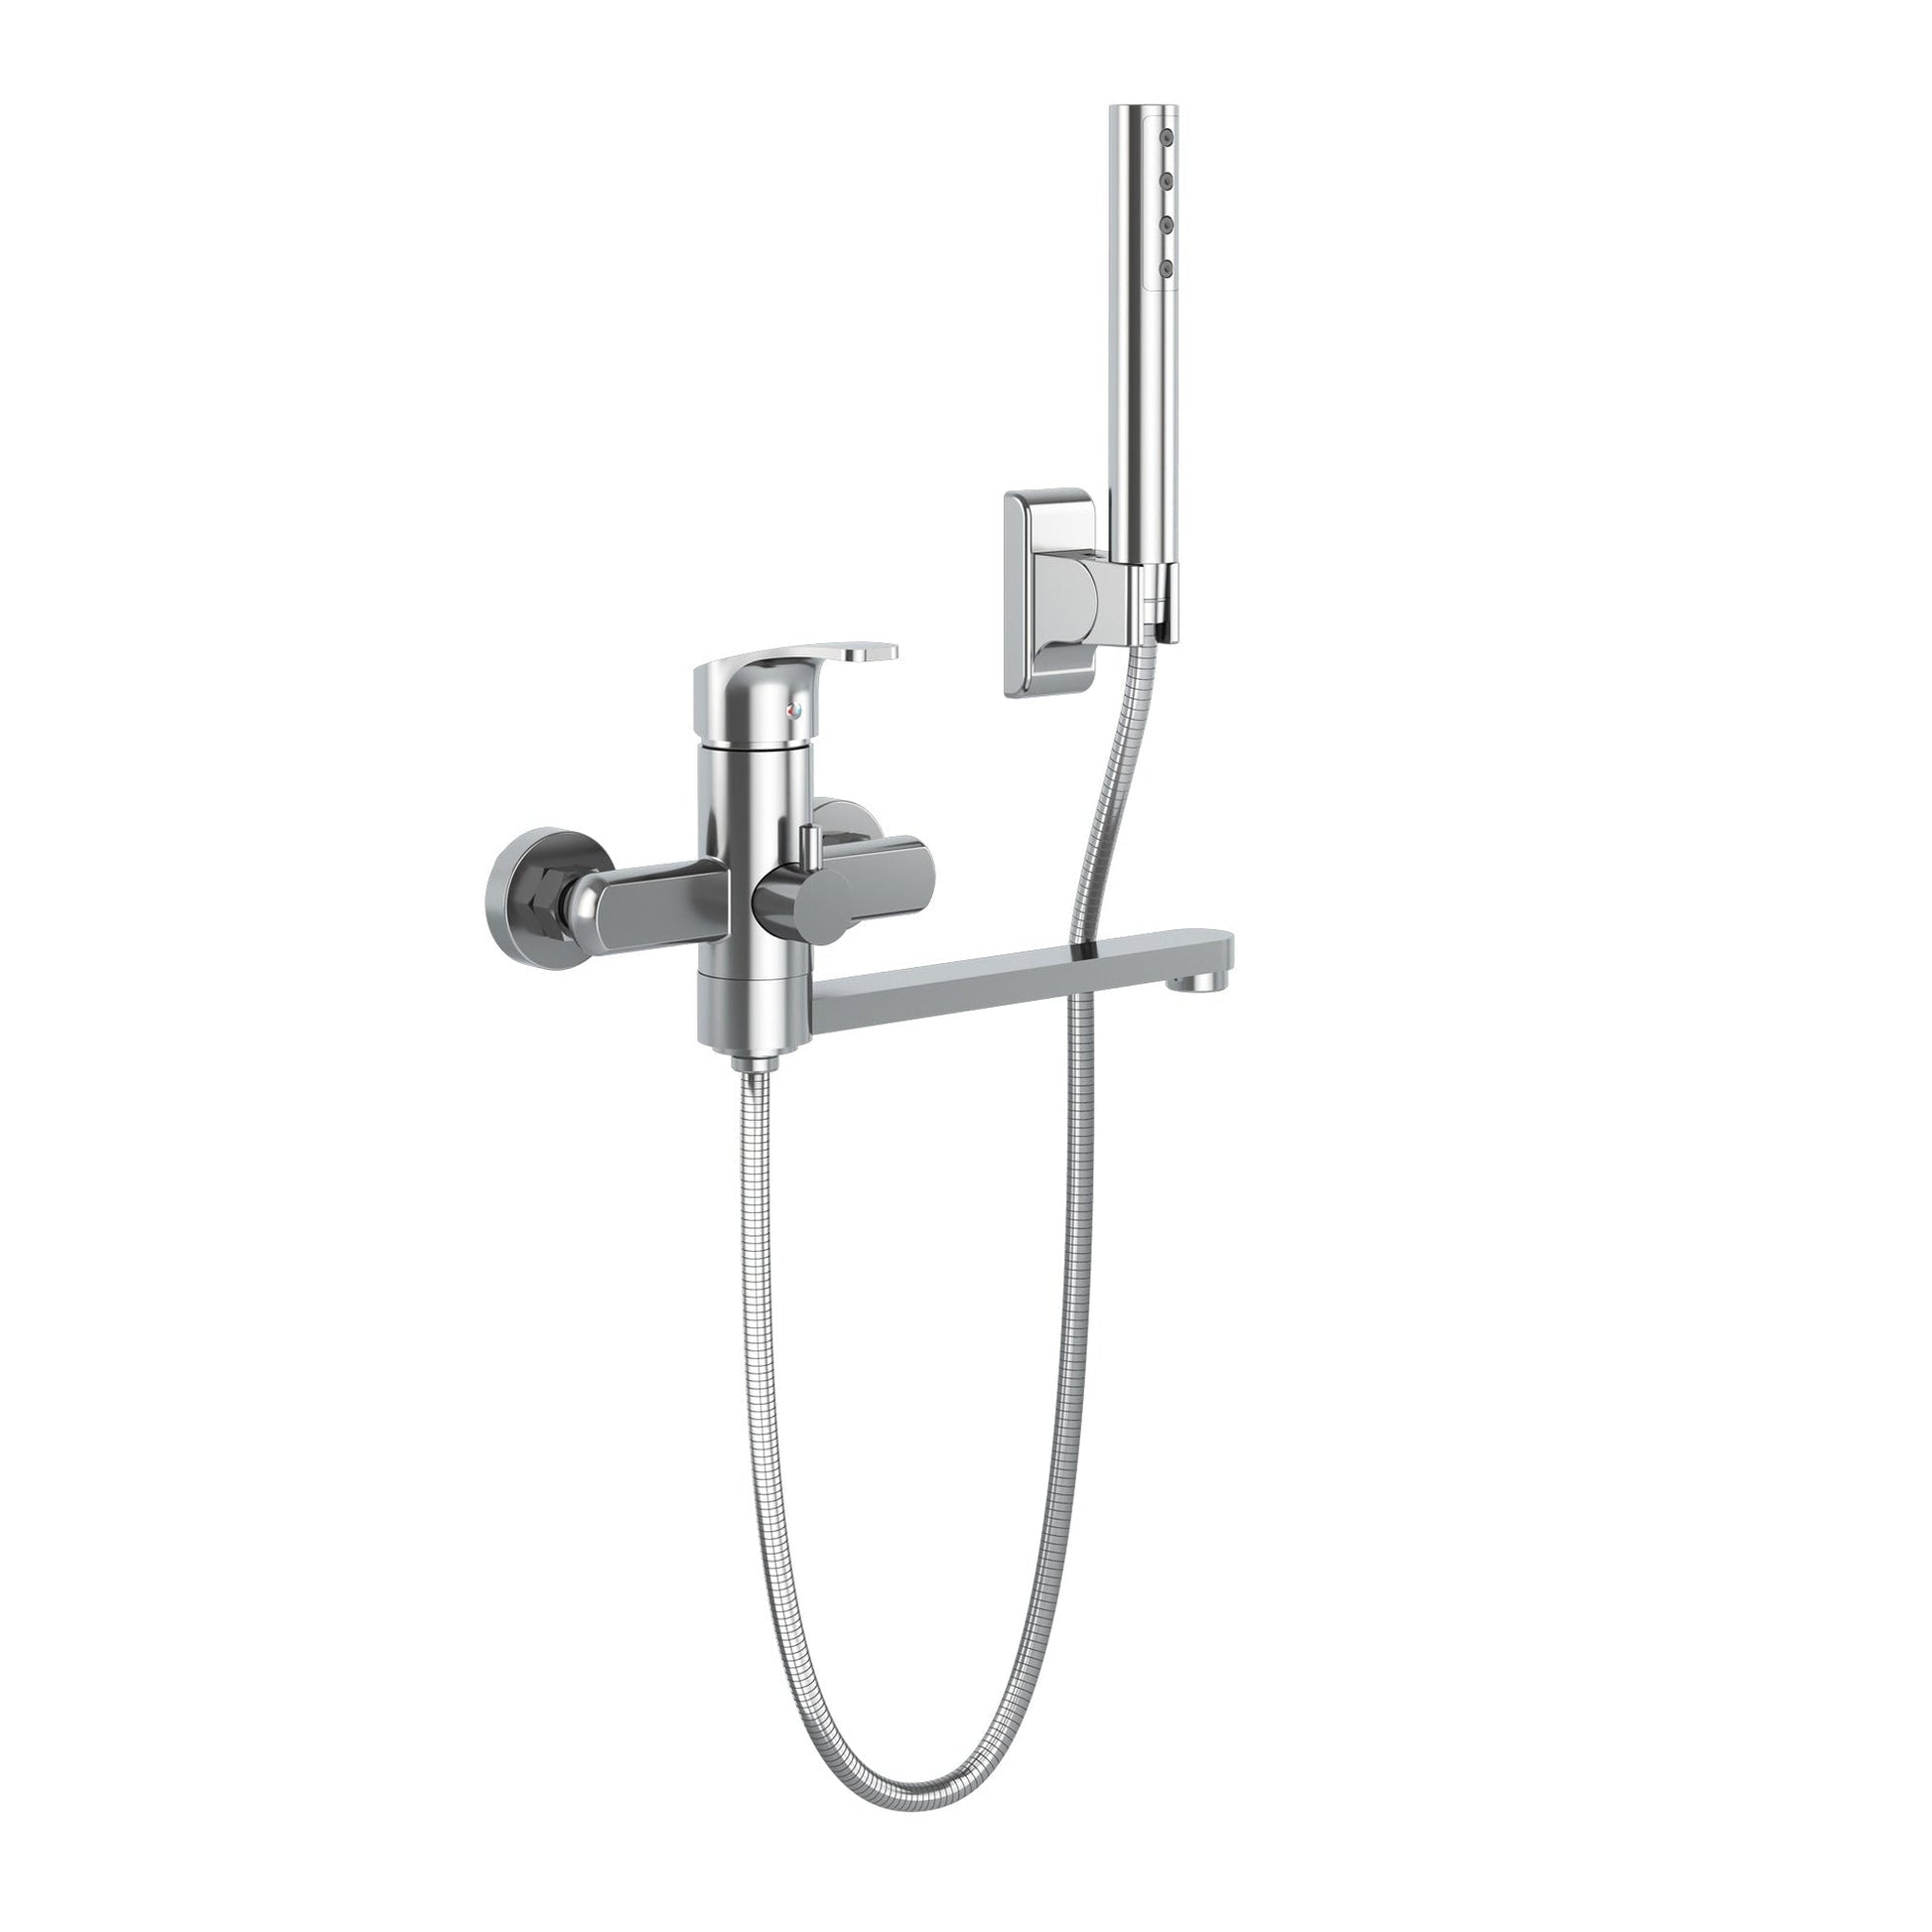 PULSE ShowerSpas Niagra Wall Mounted High Flow Tub Filler in Chrome Finish With Single Function Hand Shower